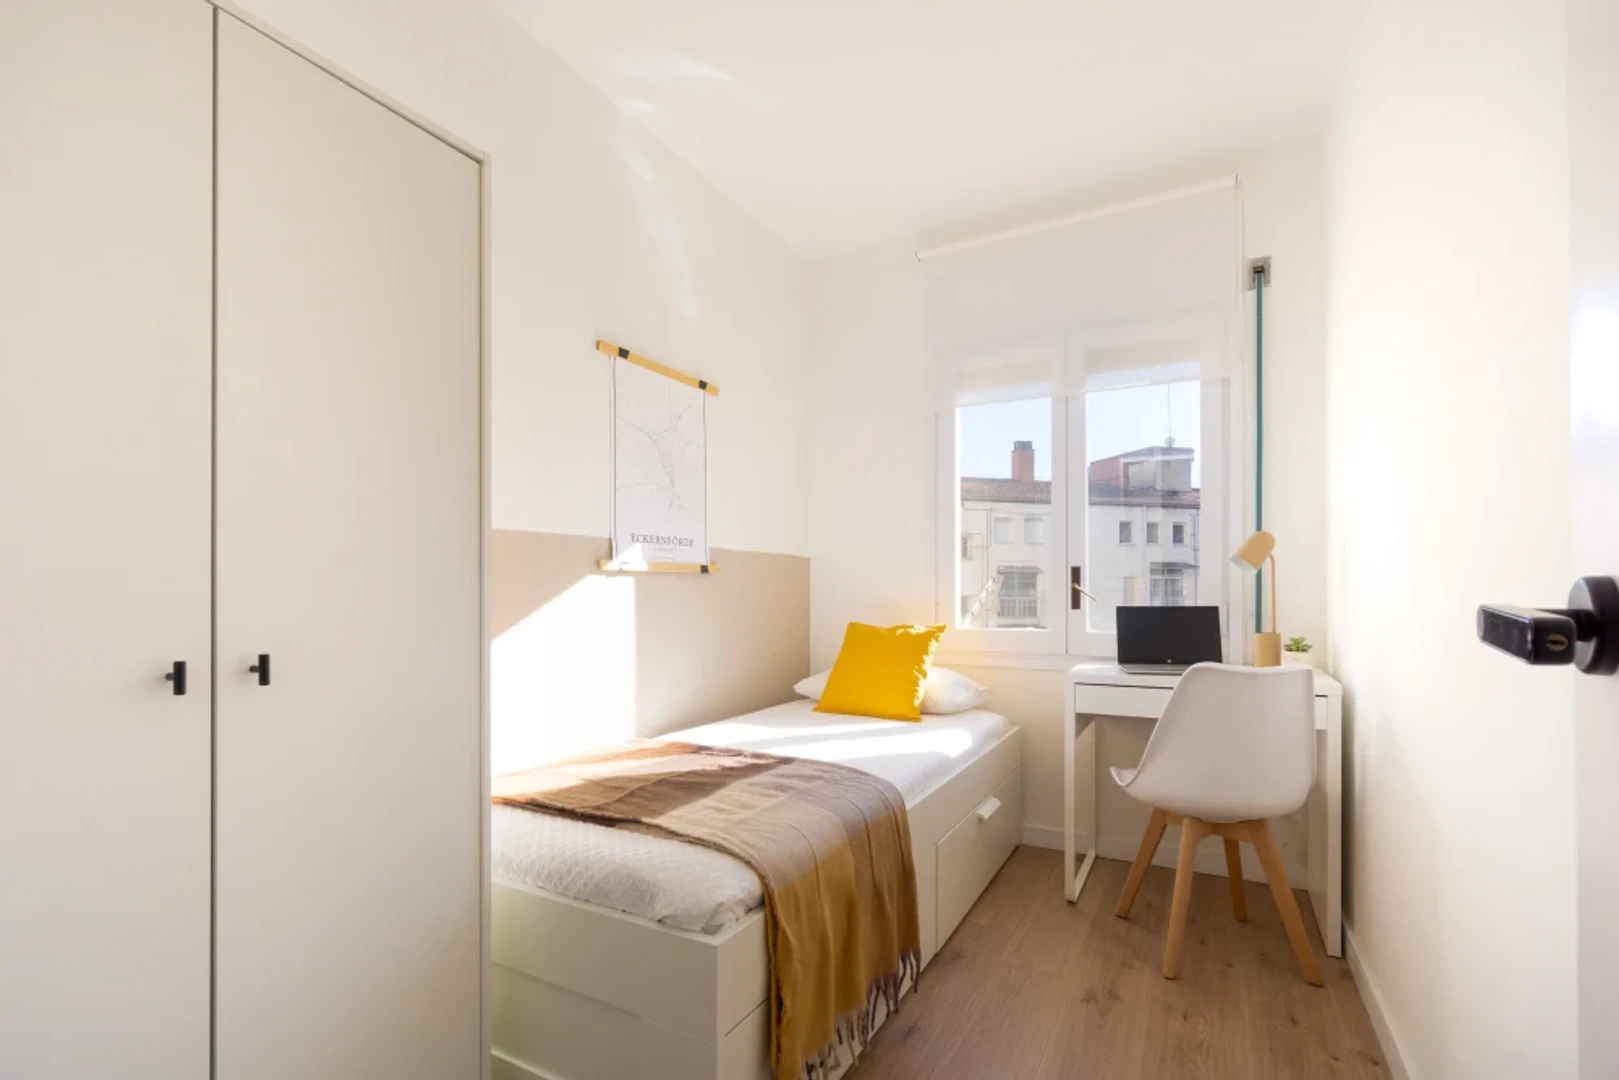 Room for rent with double bed Girona